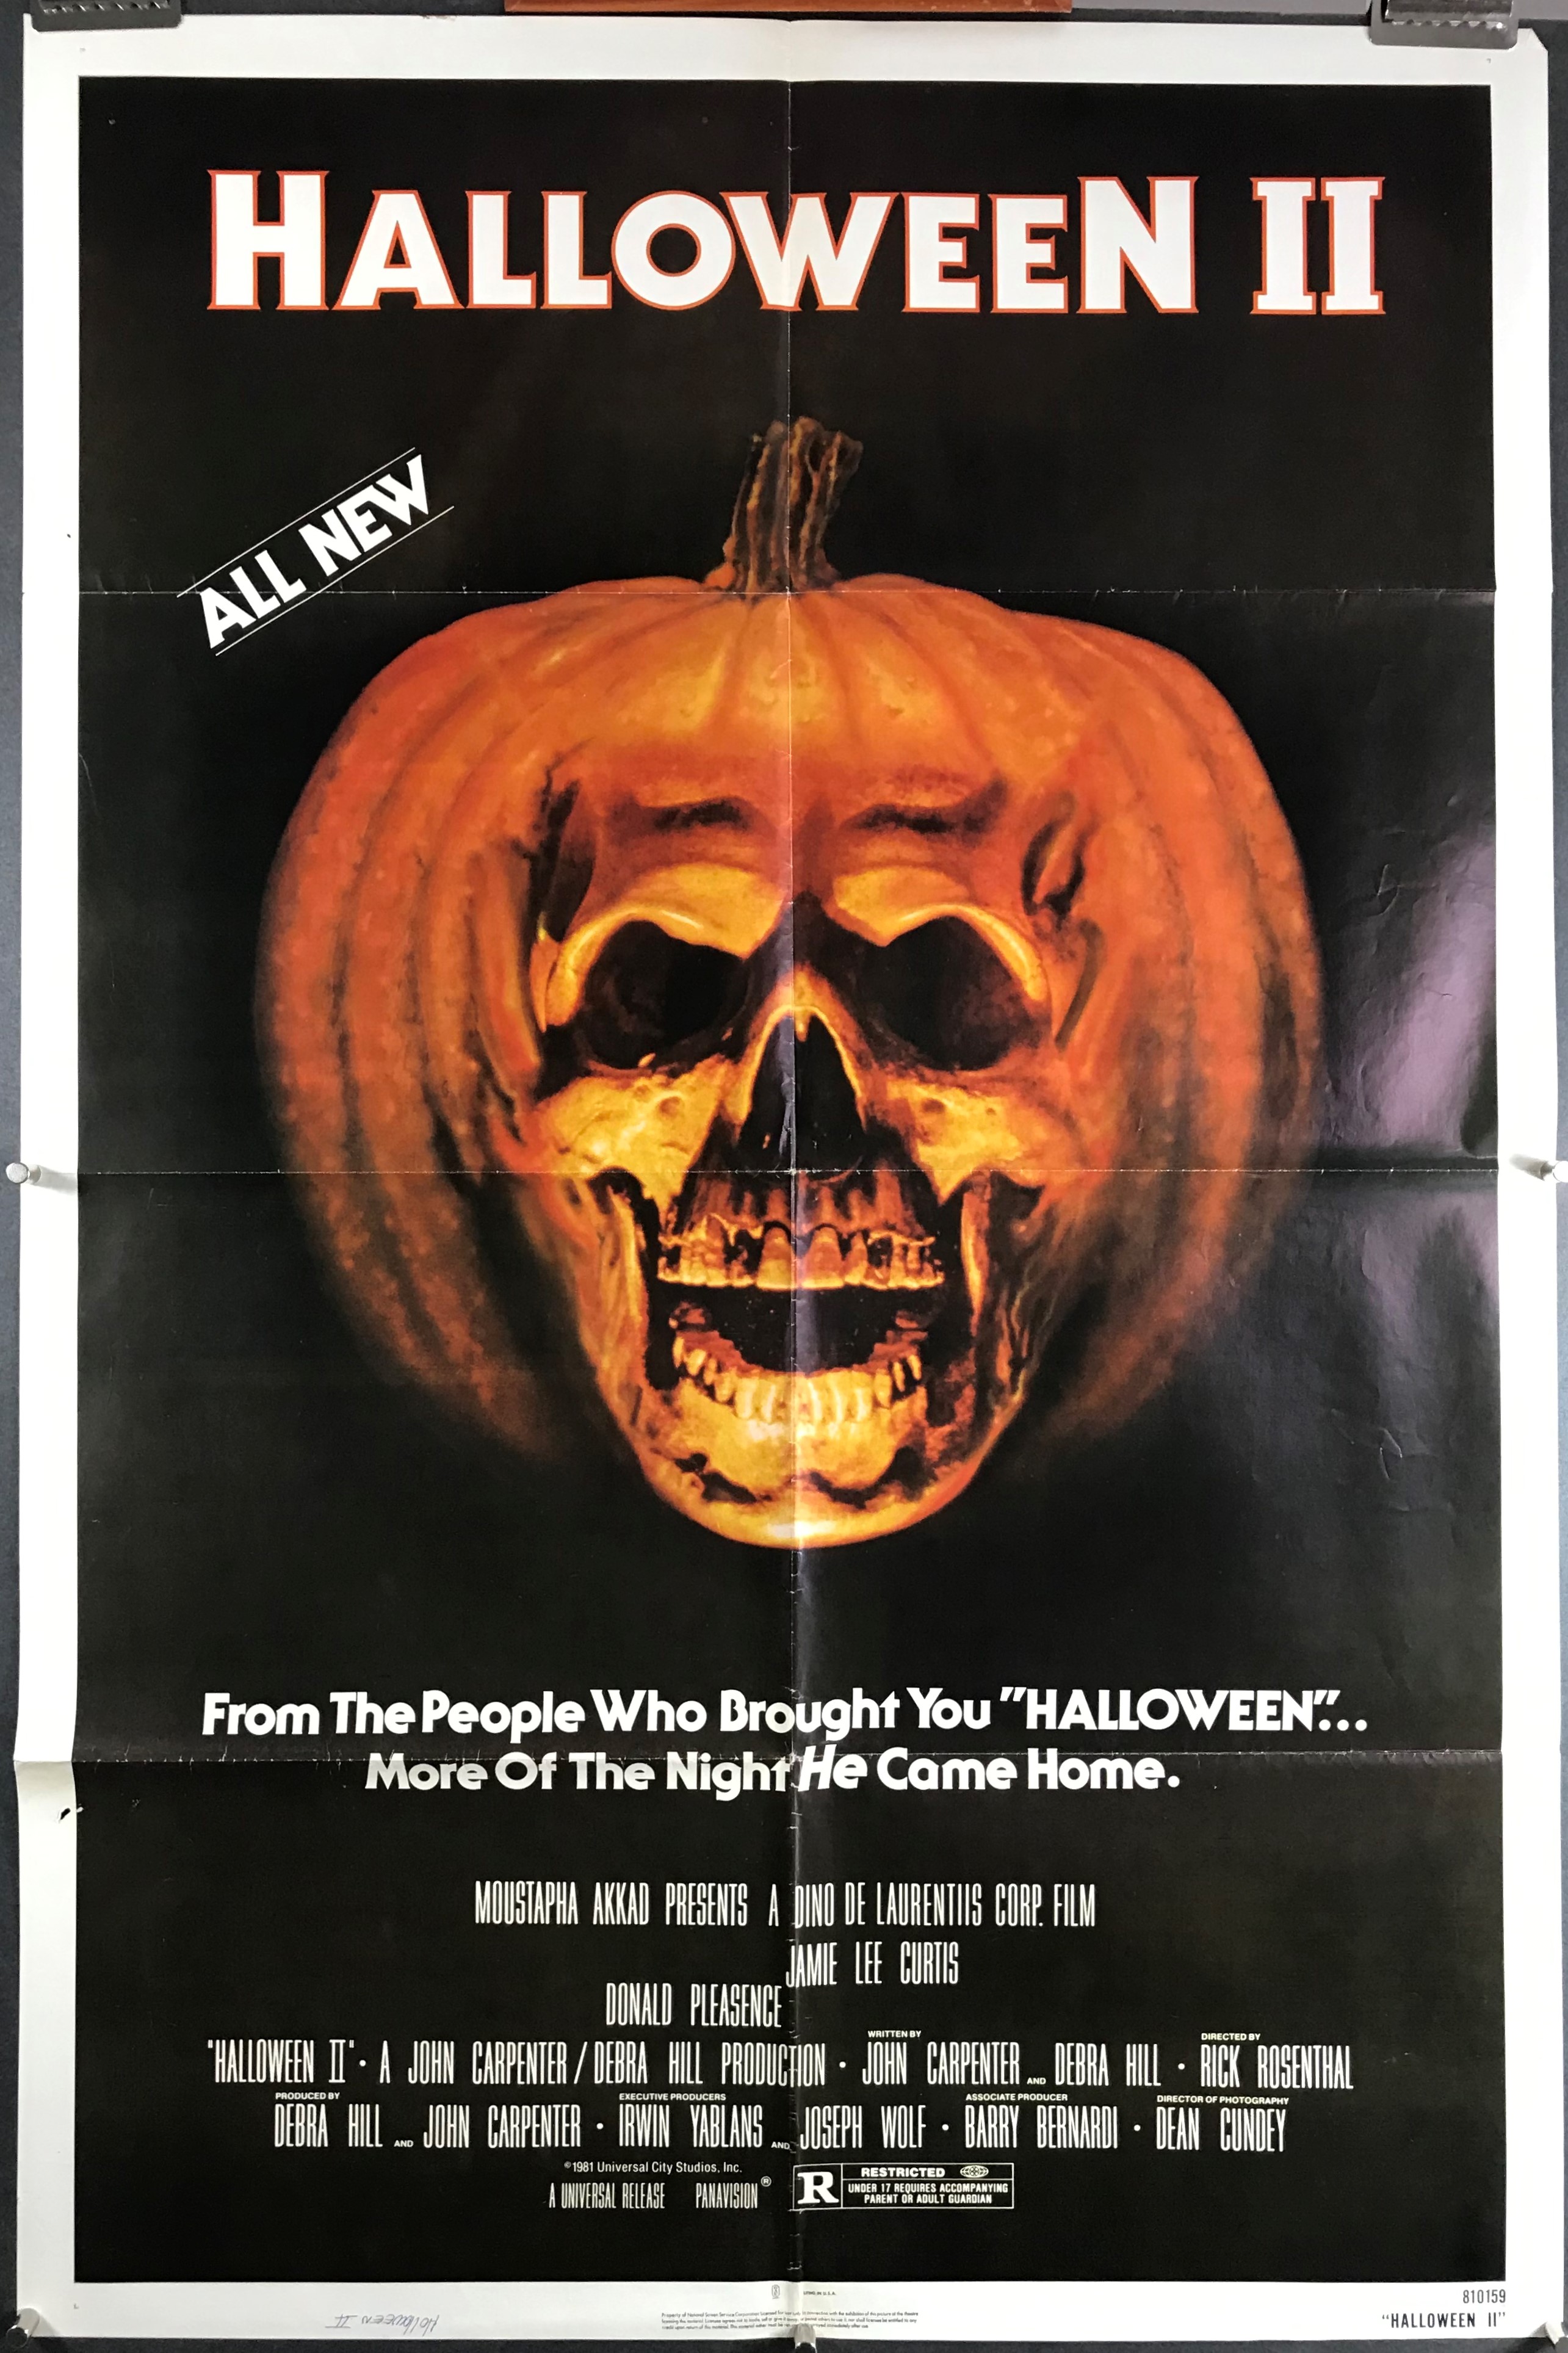 Classic Thriller Cult Horror Film Print HALLOWEEN 2 II 1981 MOVIE POSTER A3 A4 